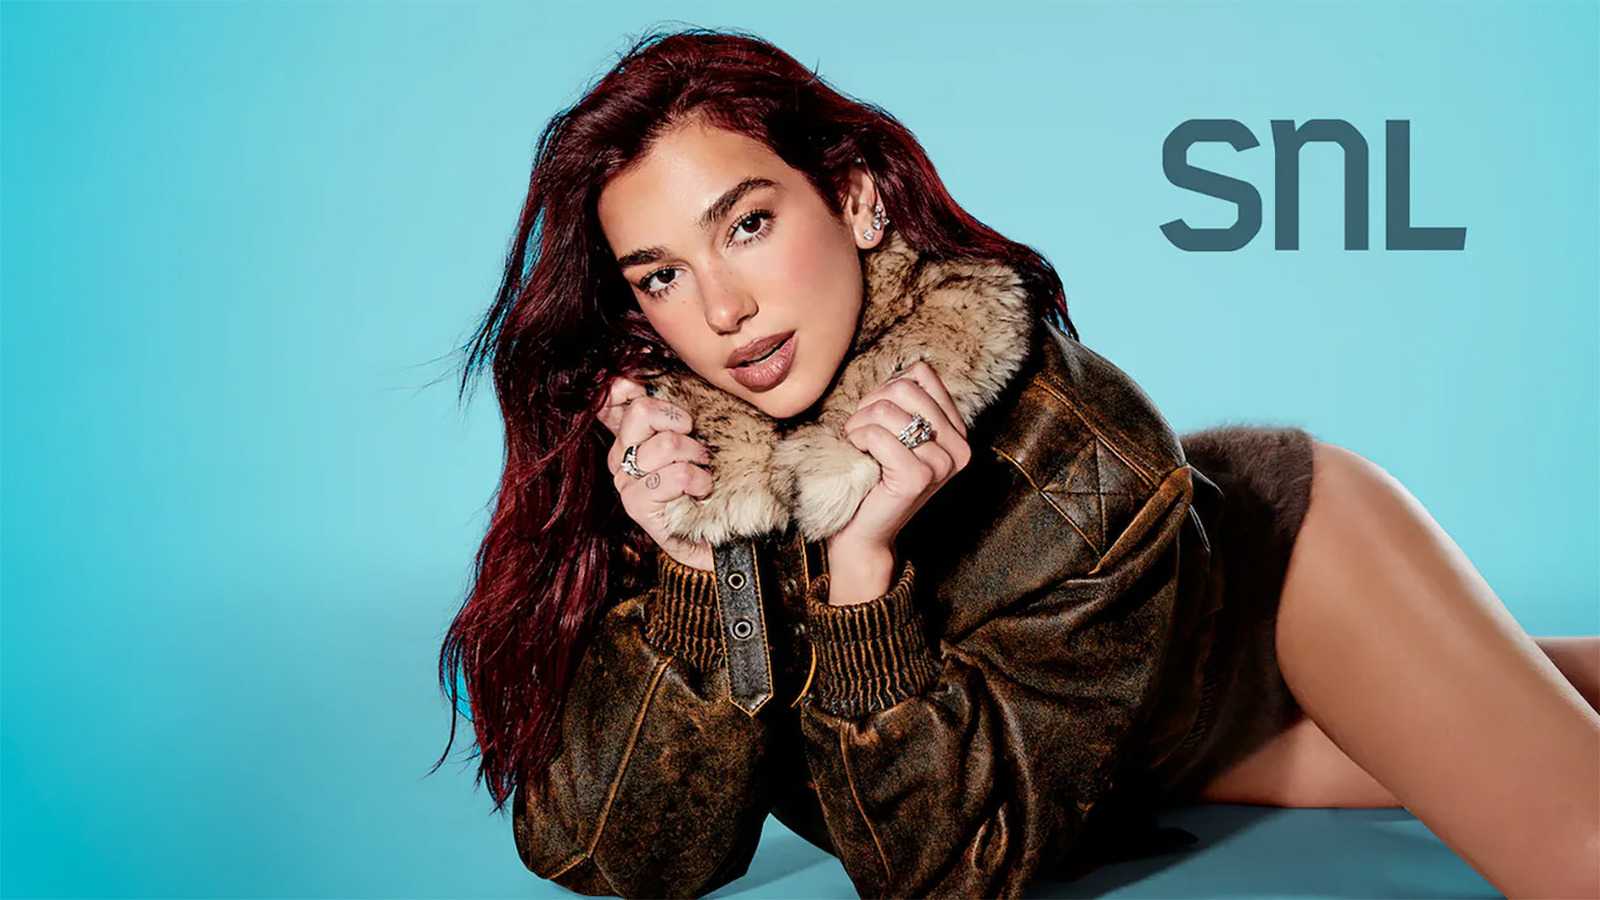 Dua Lipa Hosted Saturday Night Live: Episode Recap and Review